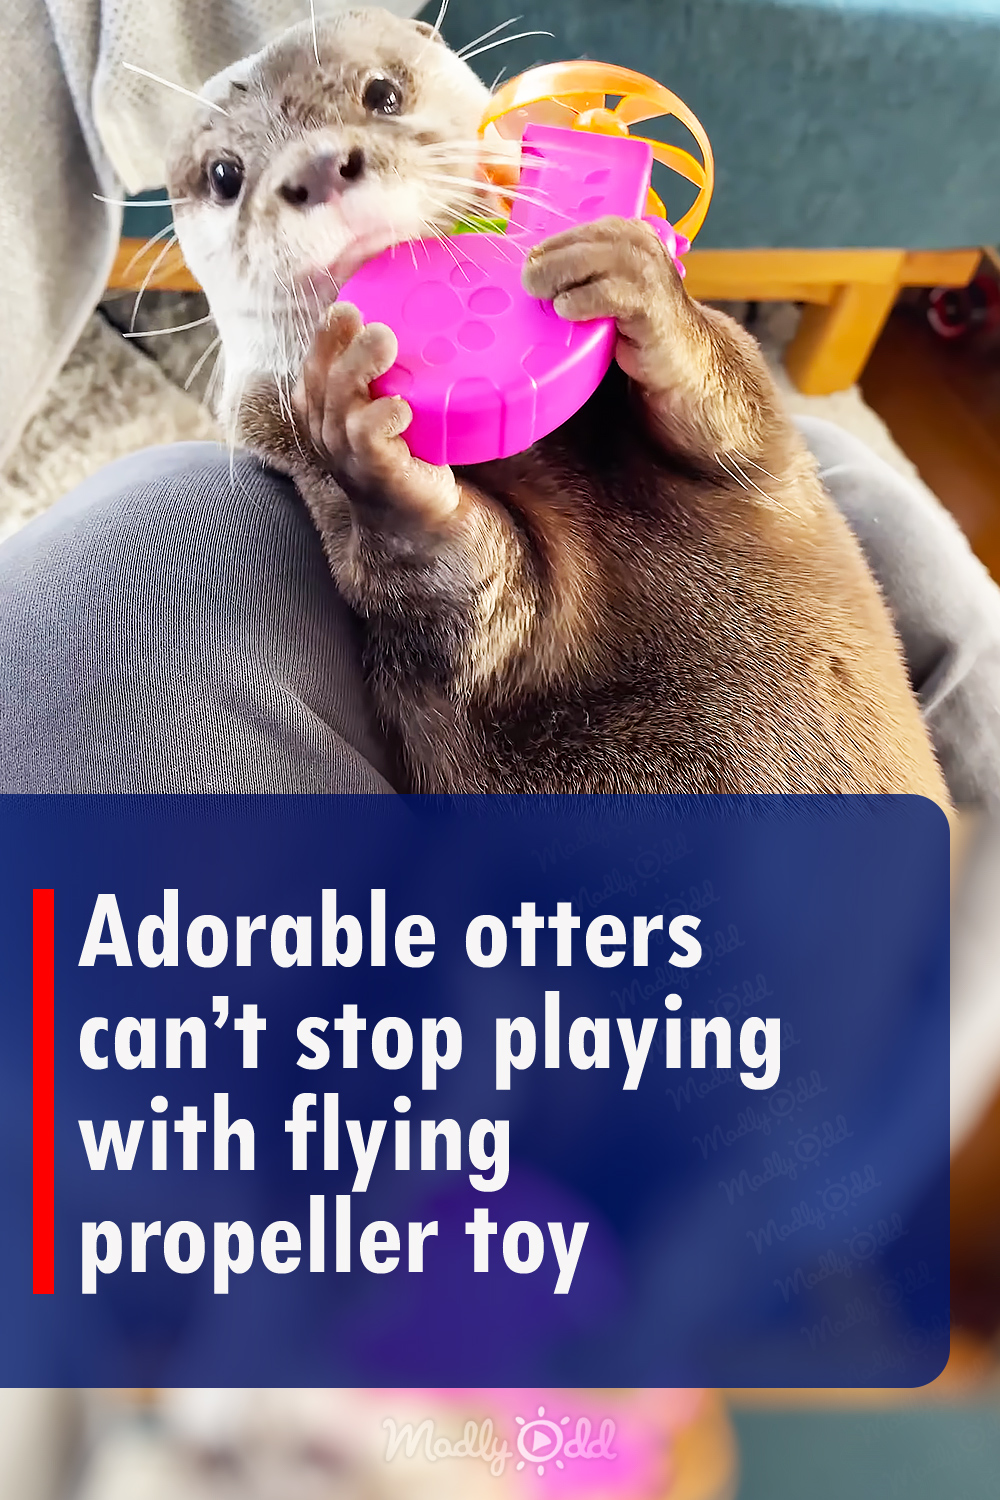 Adorable otters can’t stop playing with flying propeller toy